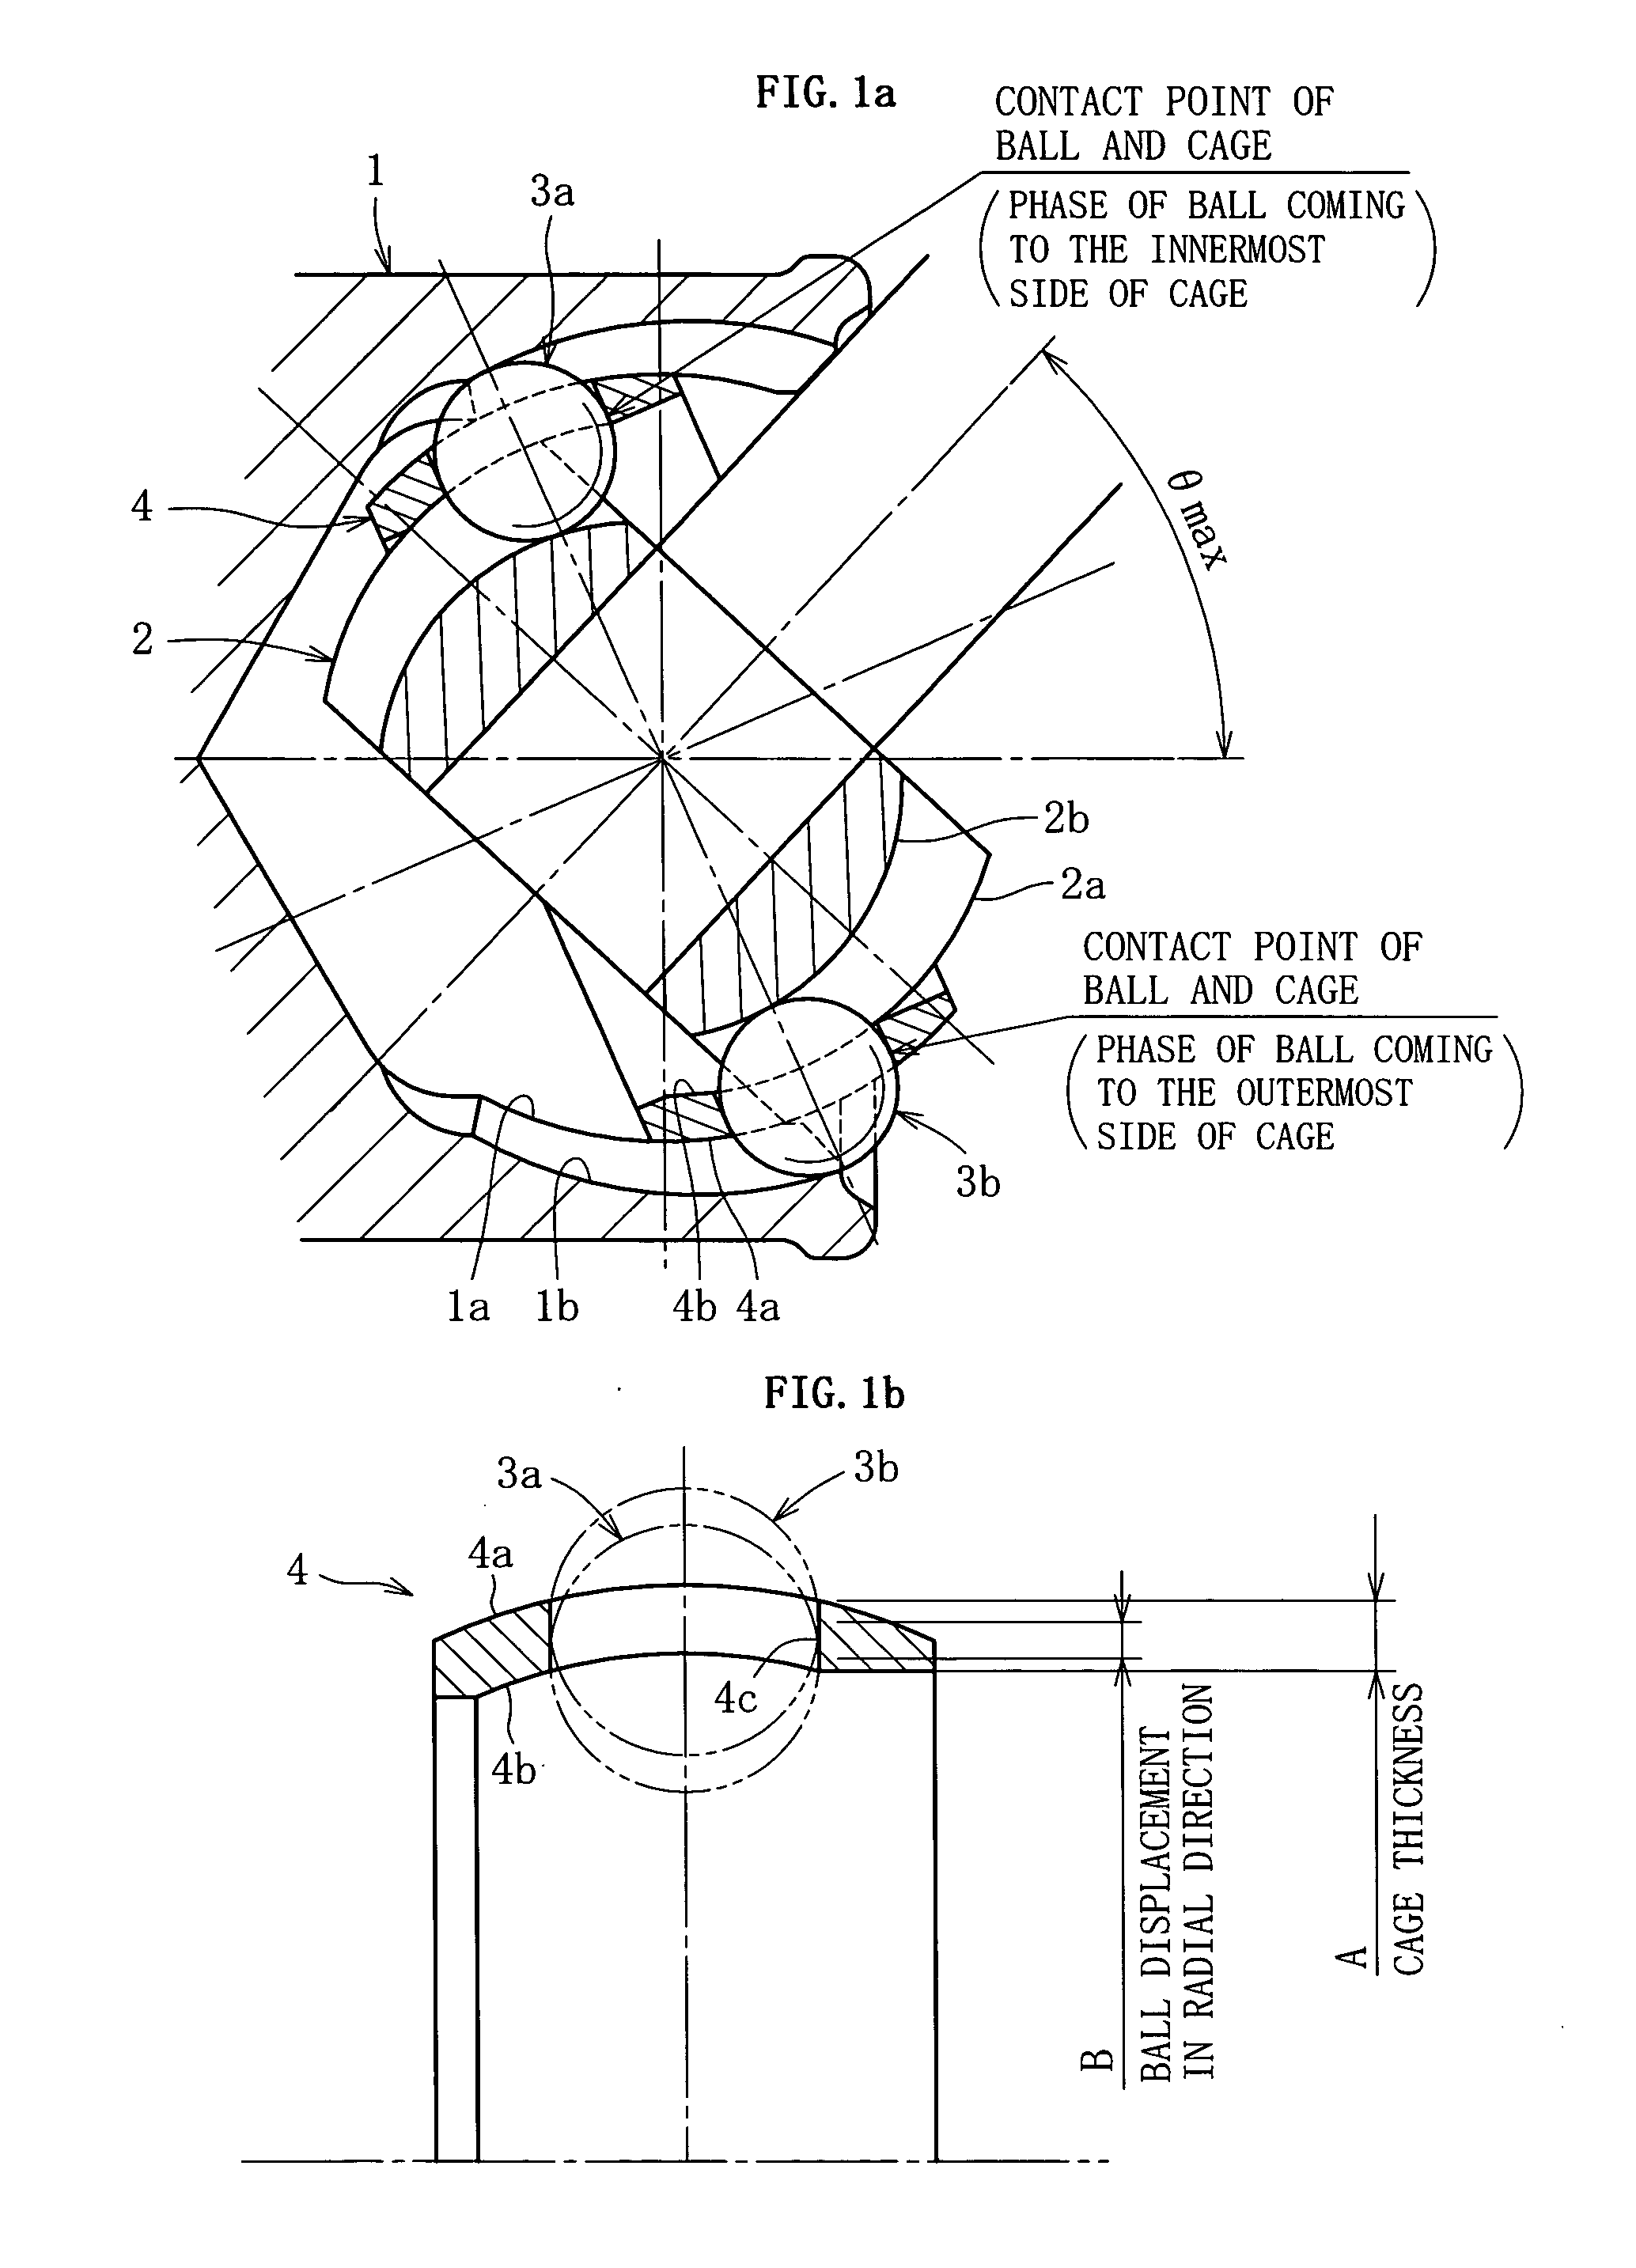 Fixed type constant velocity universal joint